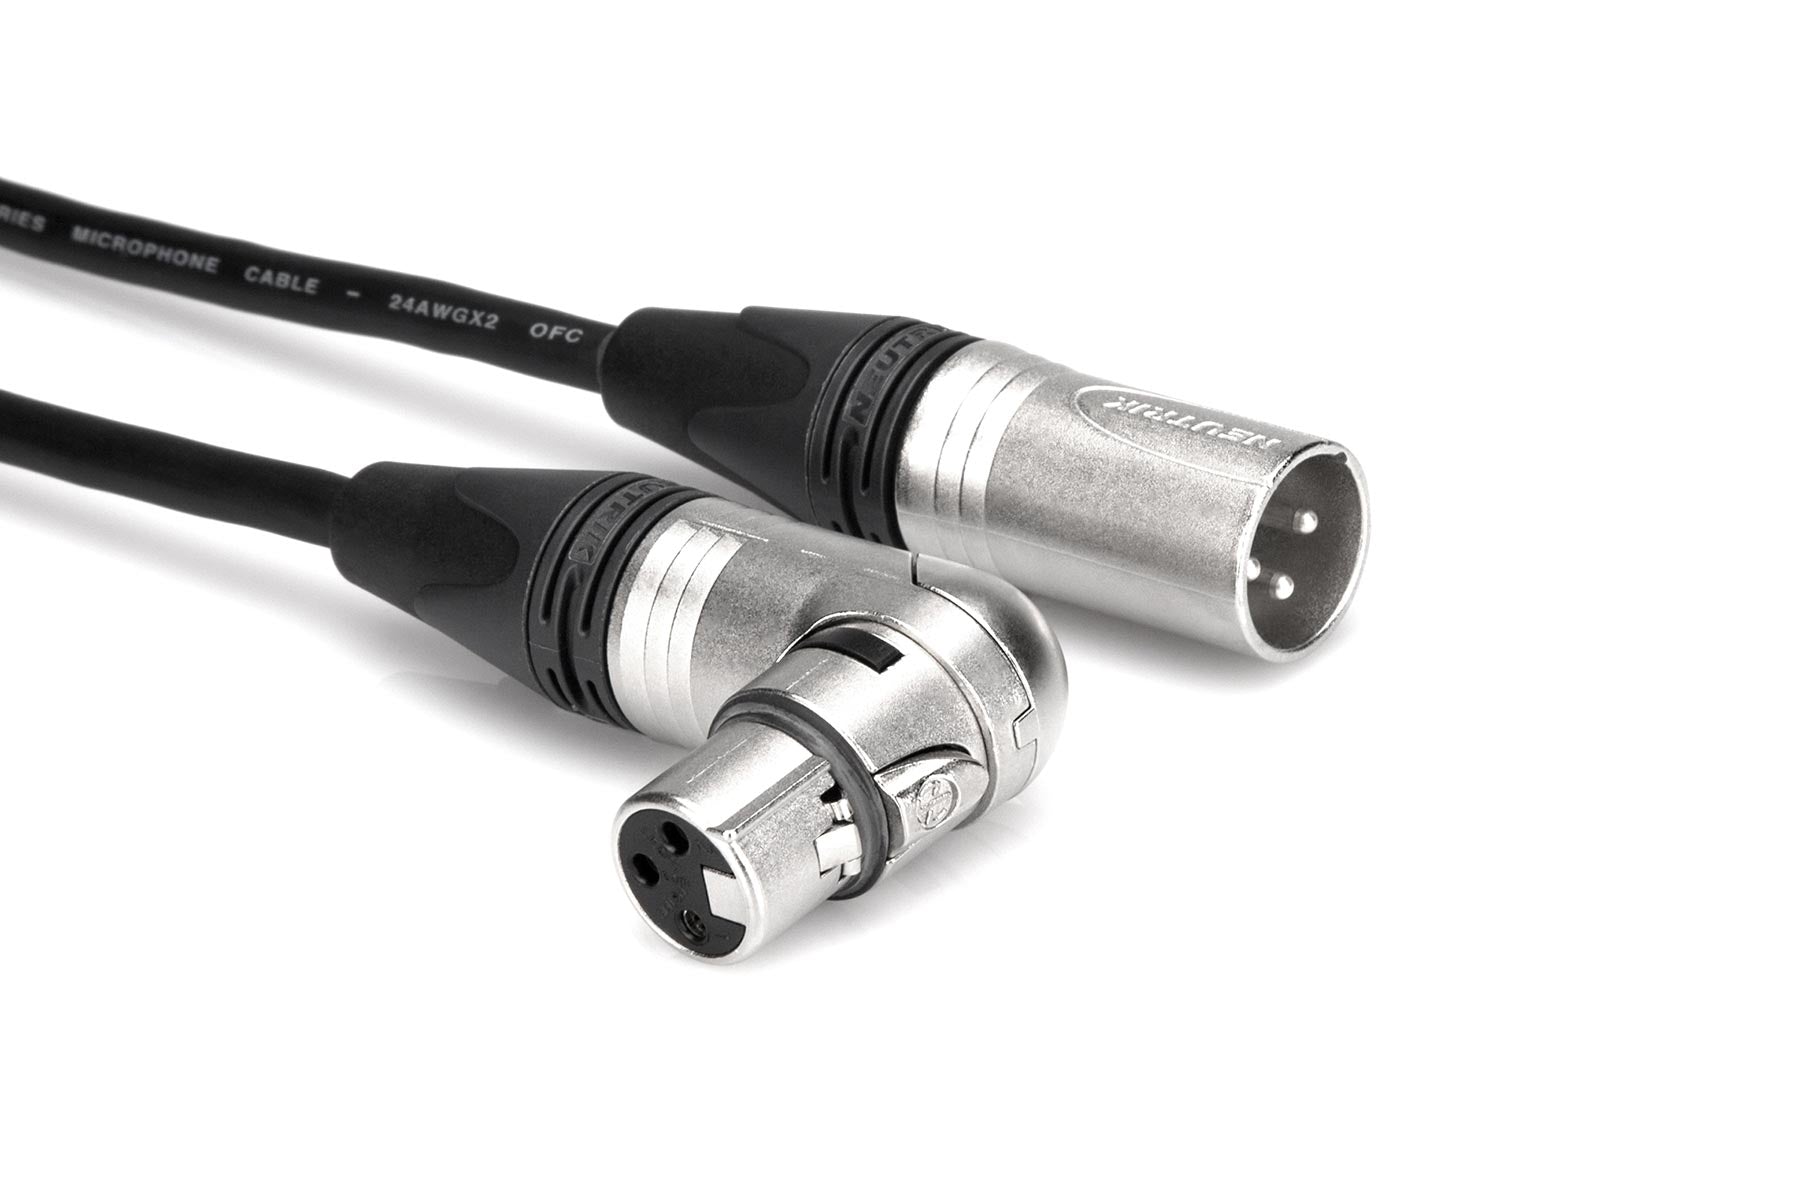 Bespeco, Microphone Cable, Jack (Stereo) to XLR Female 3 Pole - 6 Metres  SLSF600 85423